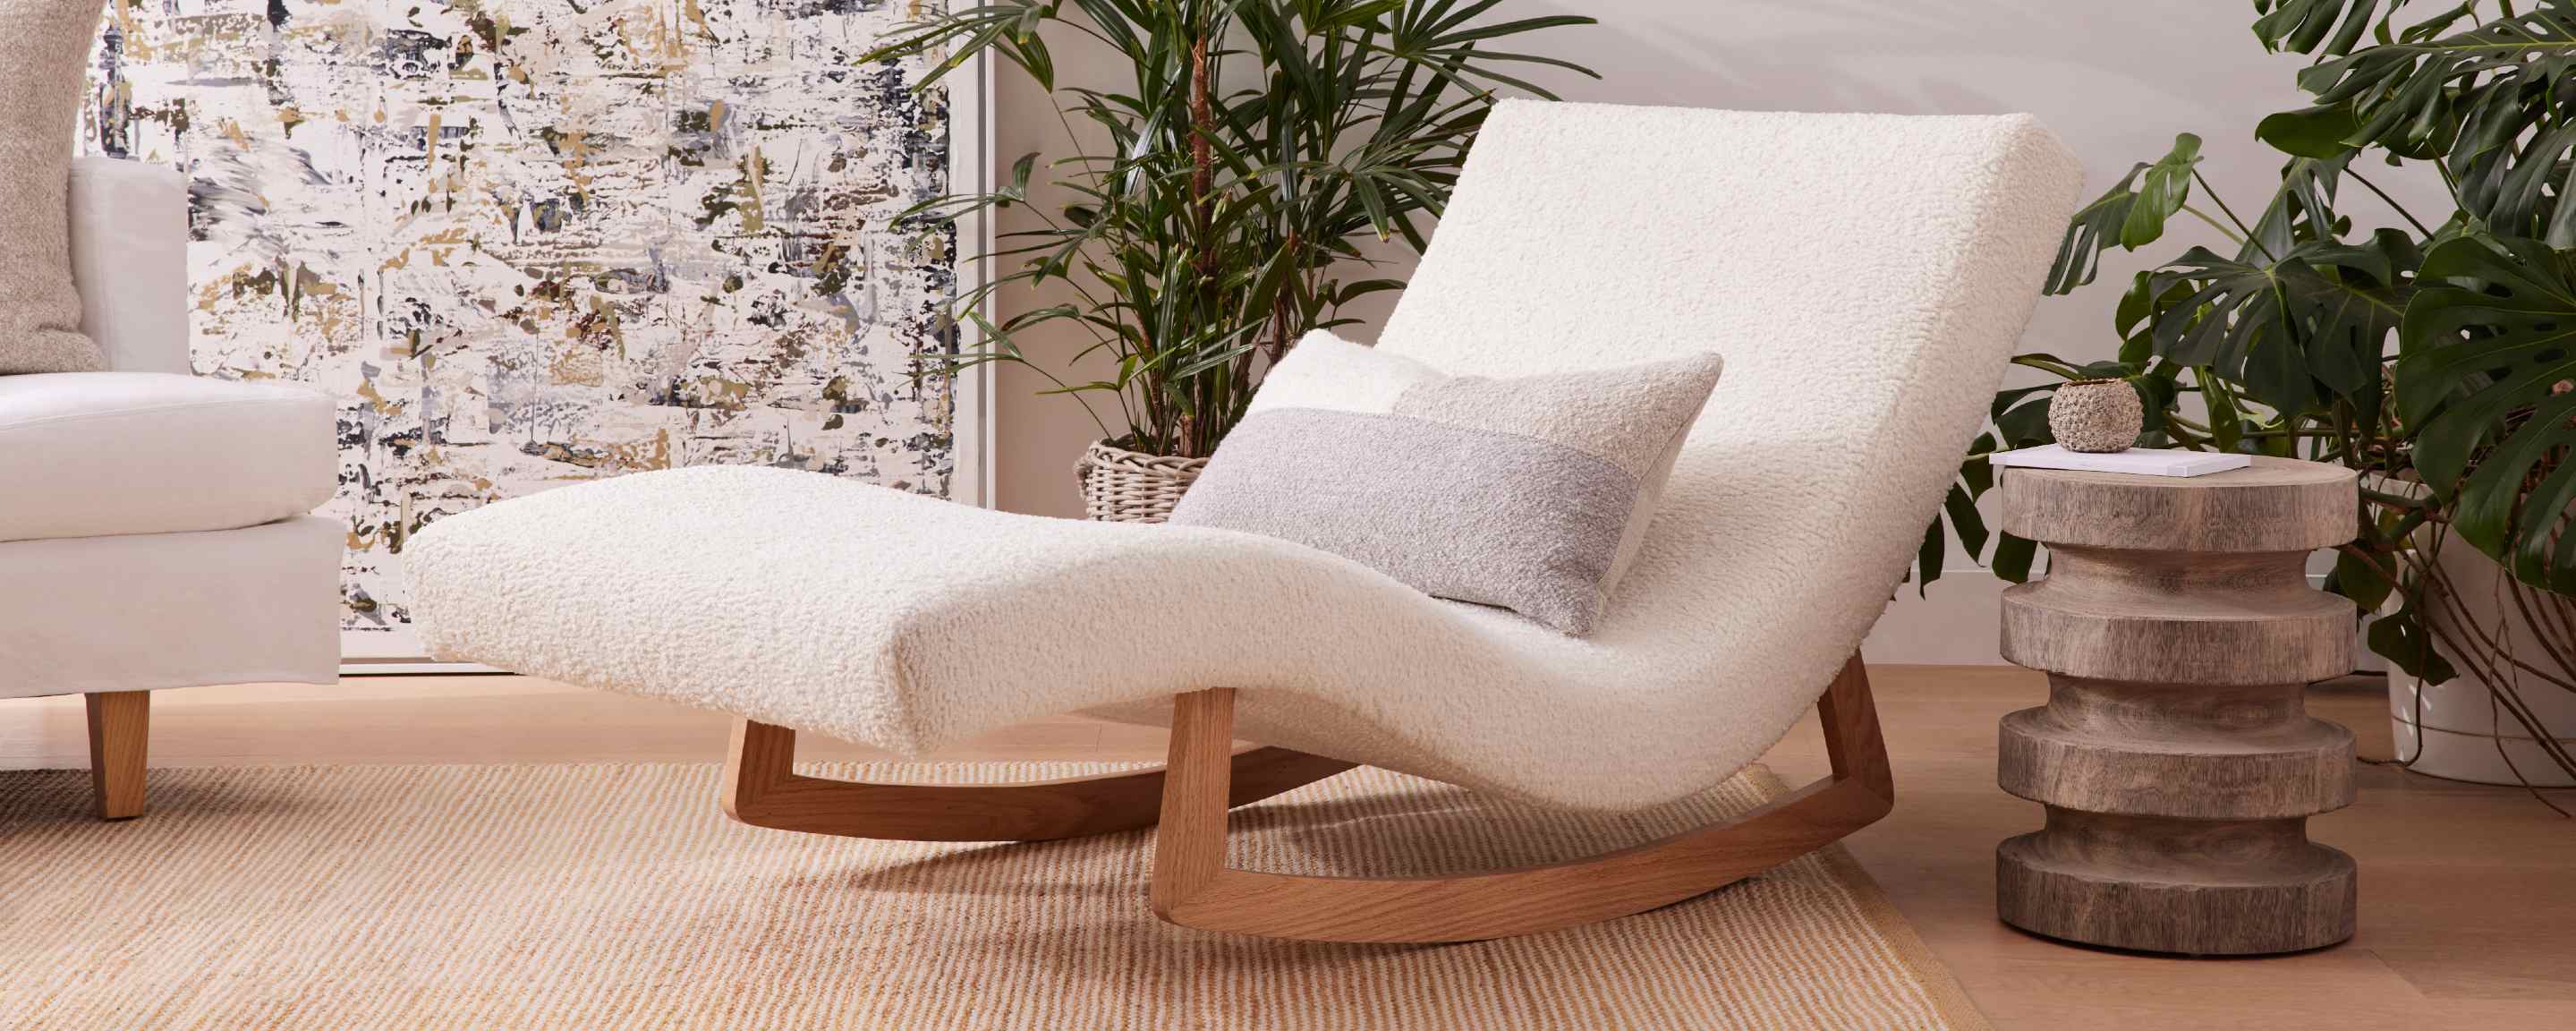 DIY Upholstered Rocking Chair, Home Decor